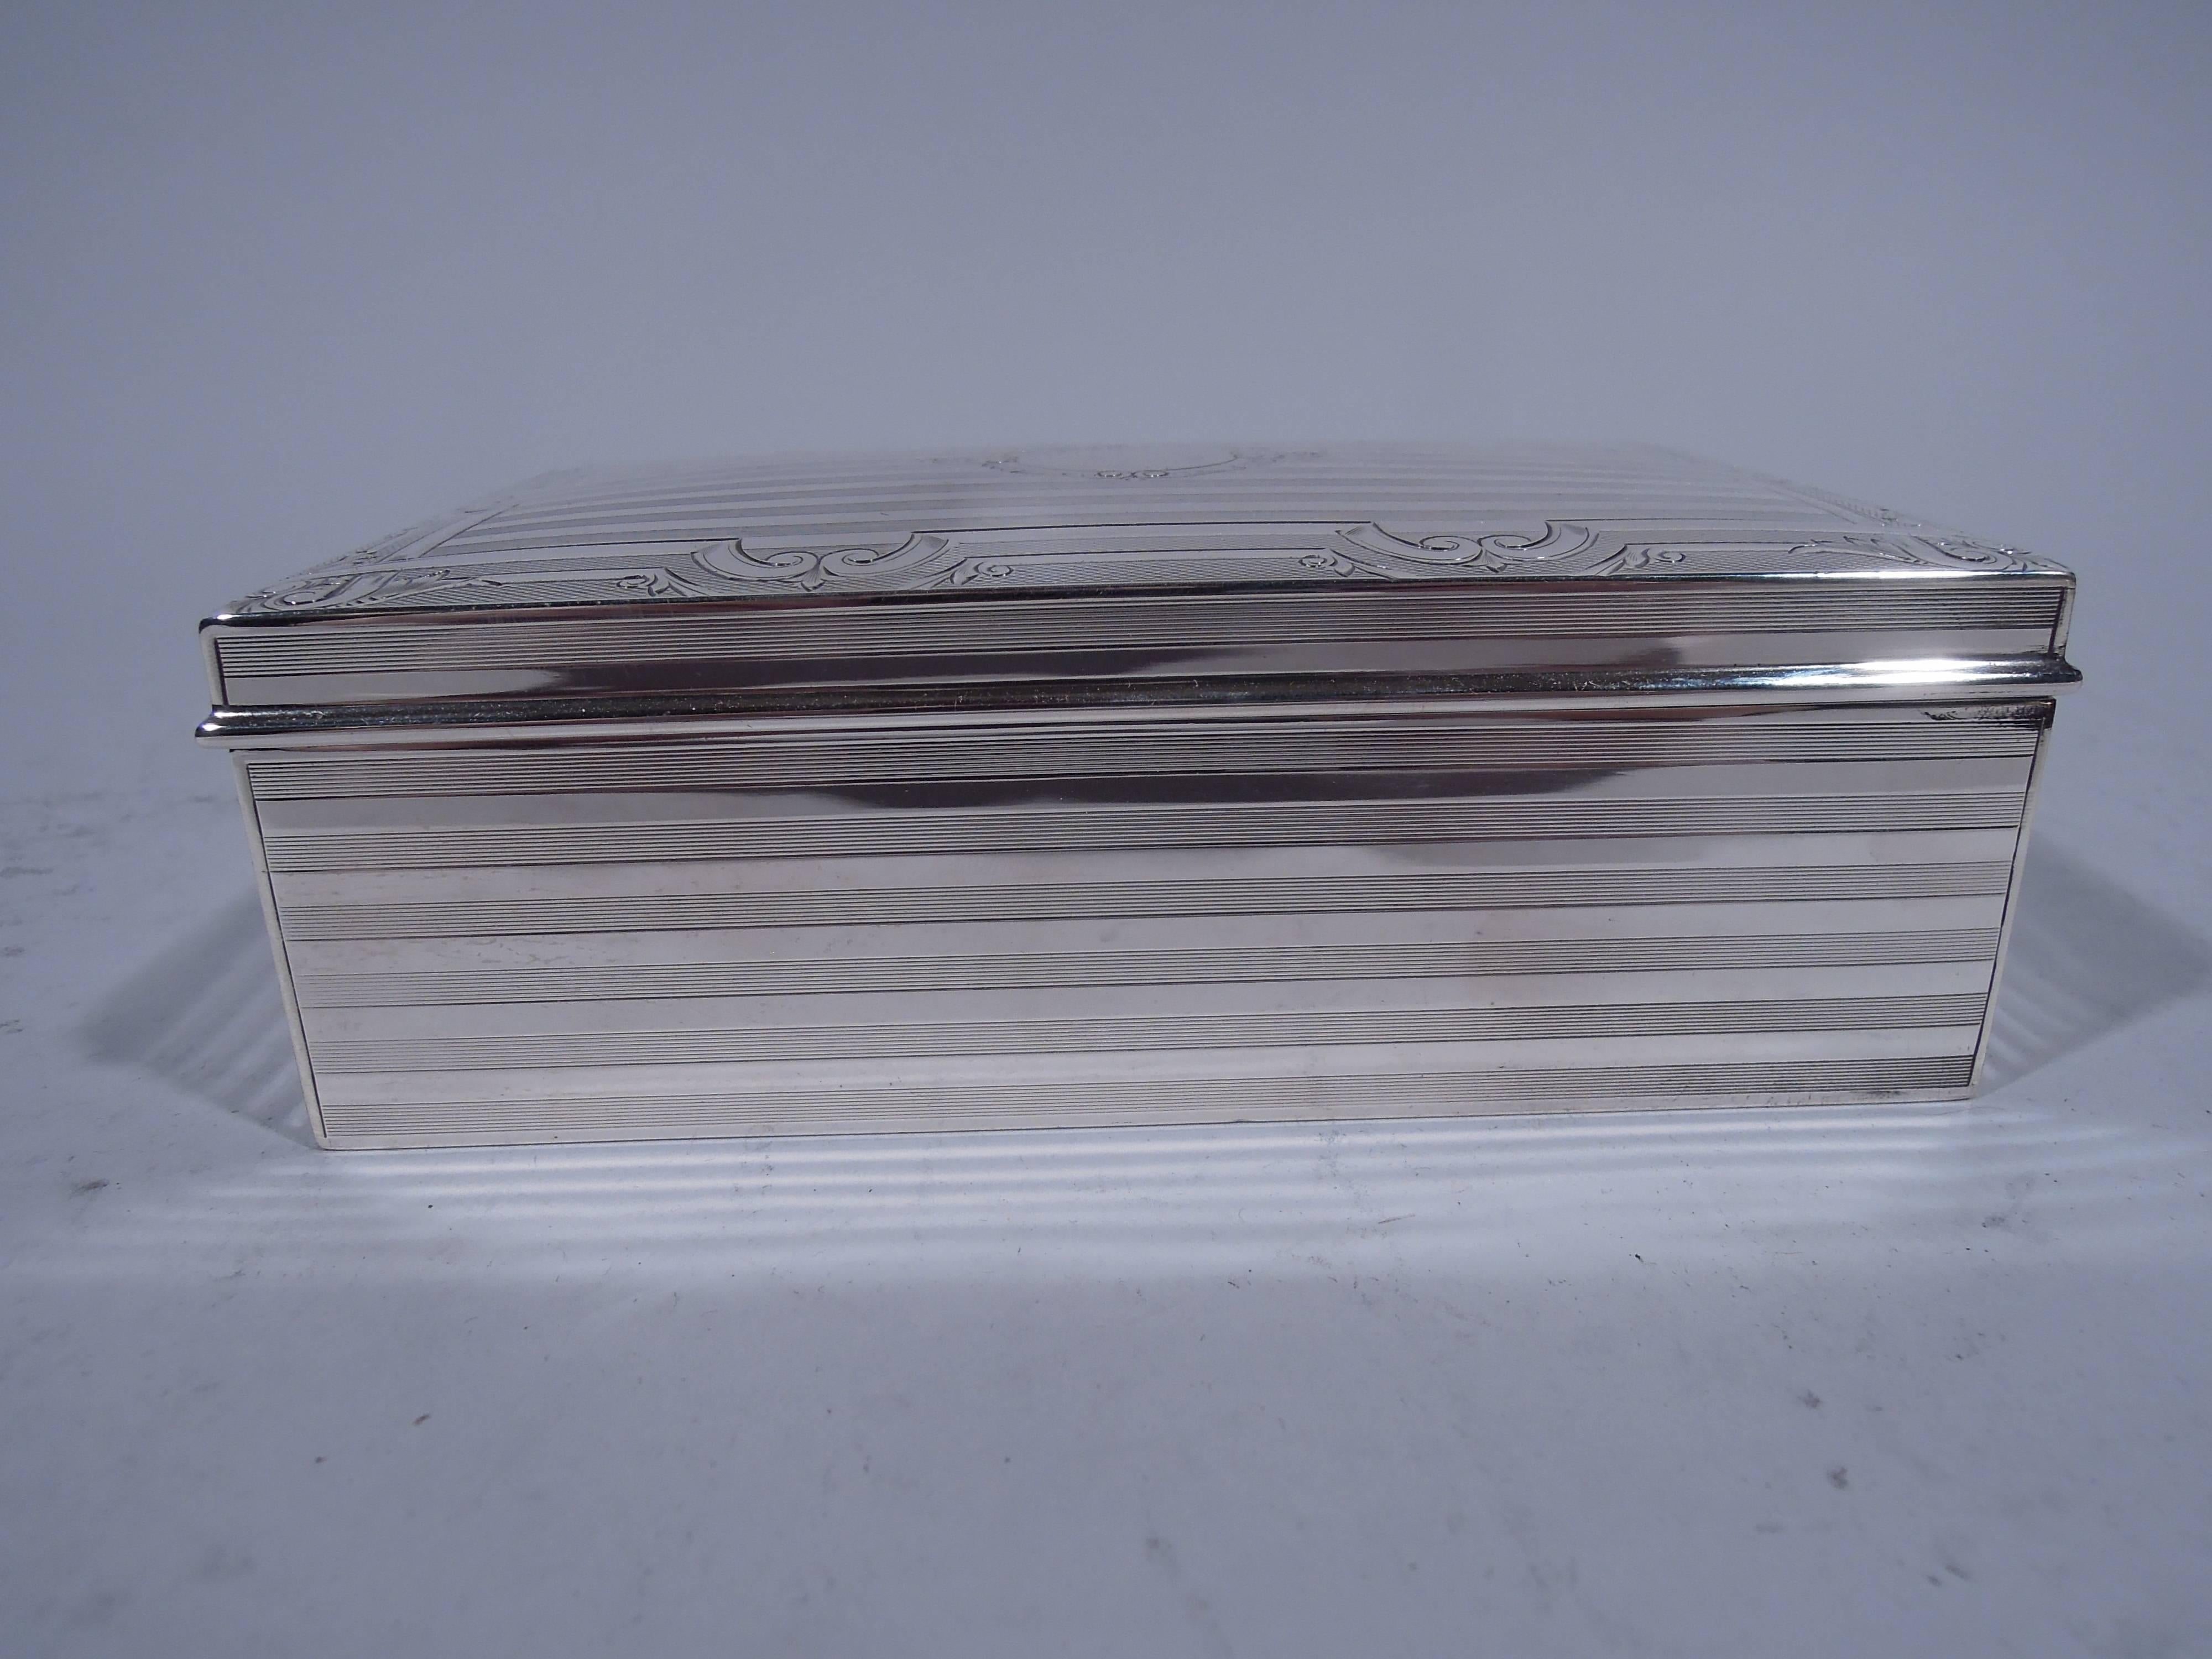 Edwardian sterling silver box. Made by John Chatellier in Newark, circa 1915. Rectangular with wraparound stripes: Reeded alternating with plain. Cover curved and hinged with molded rim. Same ornament with strapwork border on engine-turned ground